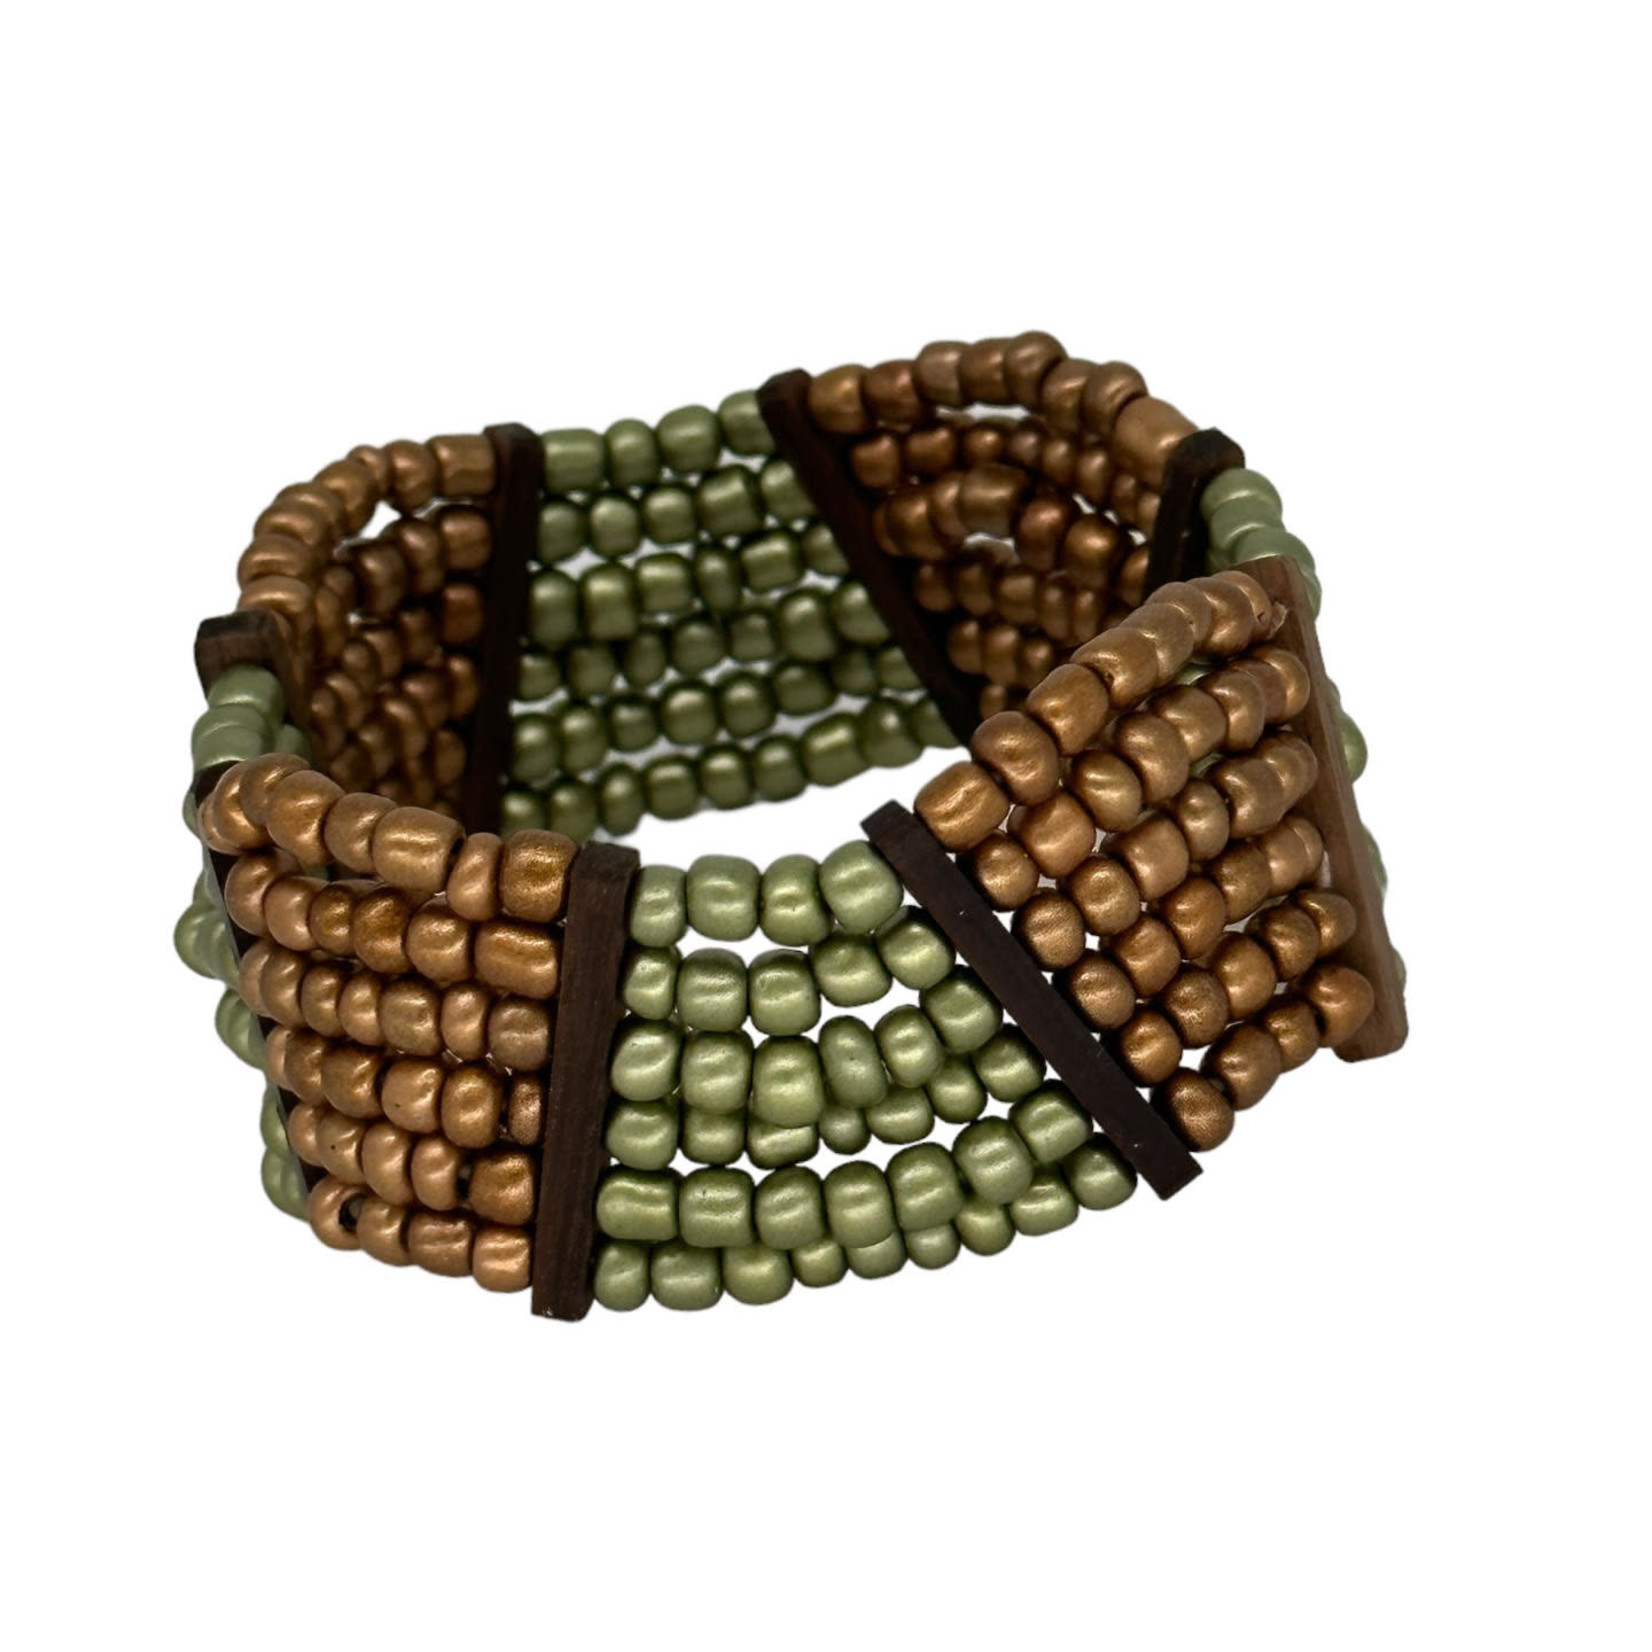 Beaded Stretch Bracelet with Wood Accents Gold and Green